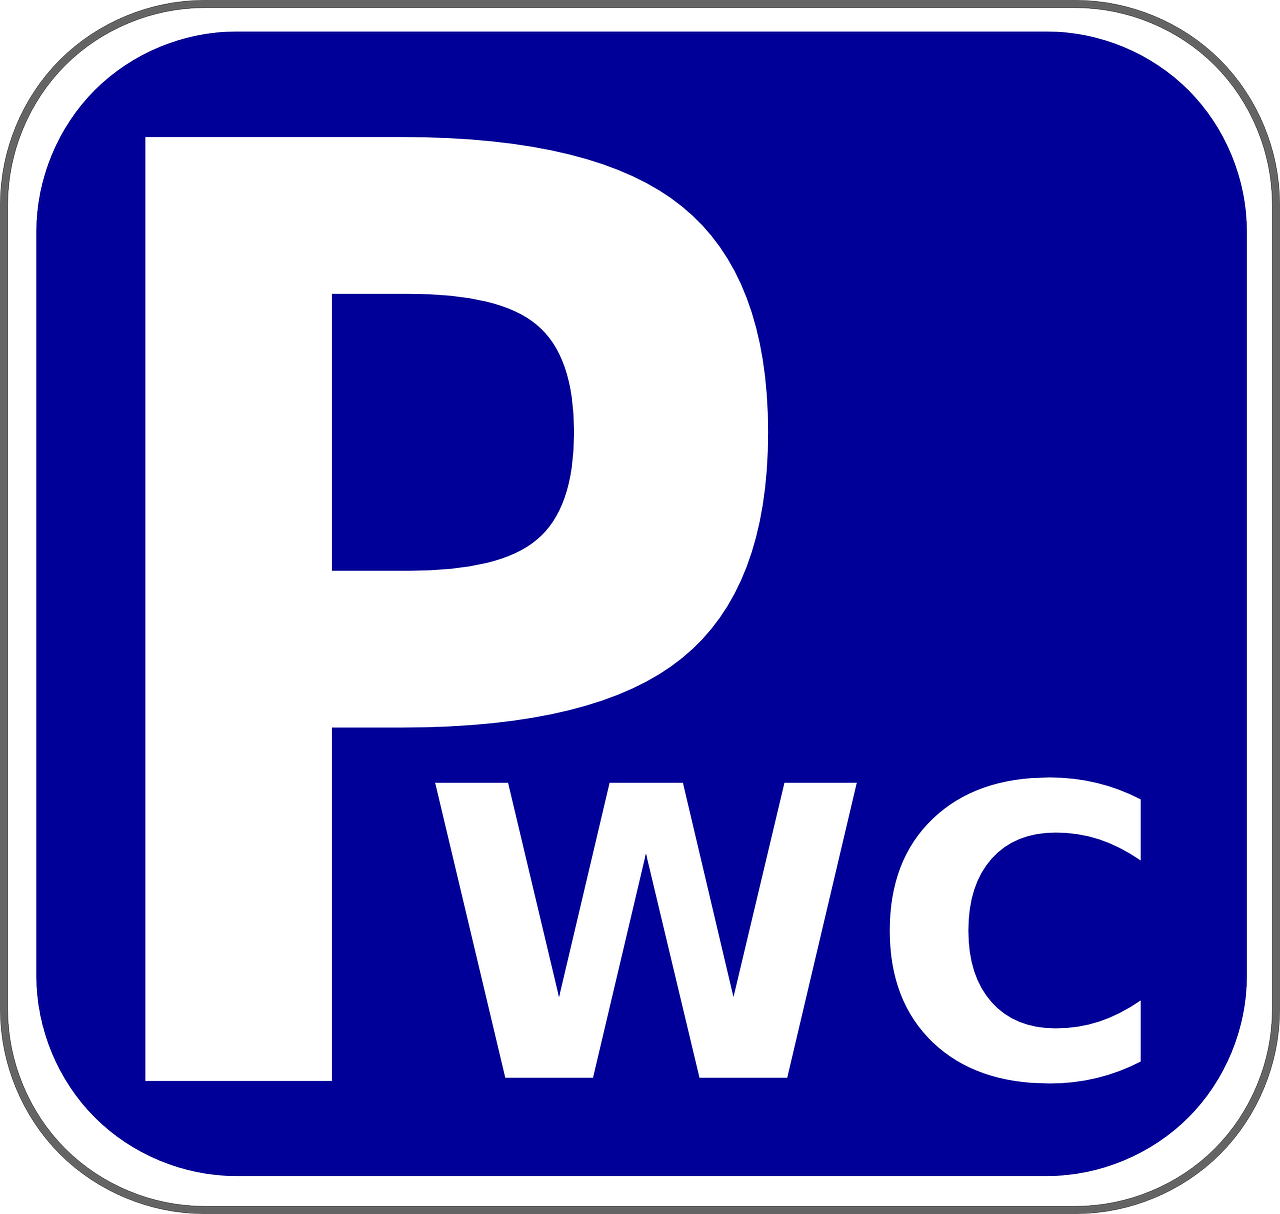 parking space traffic sign roadsign free photo